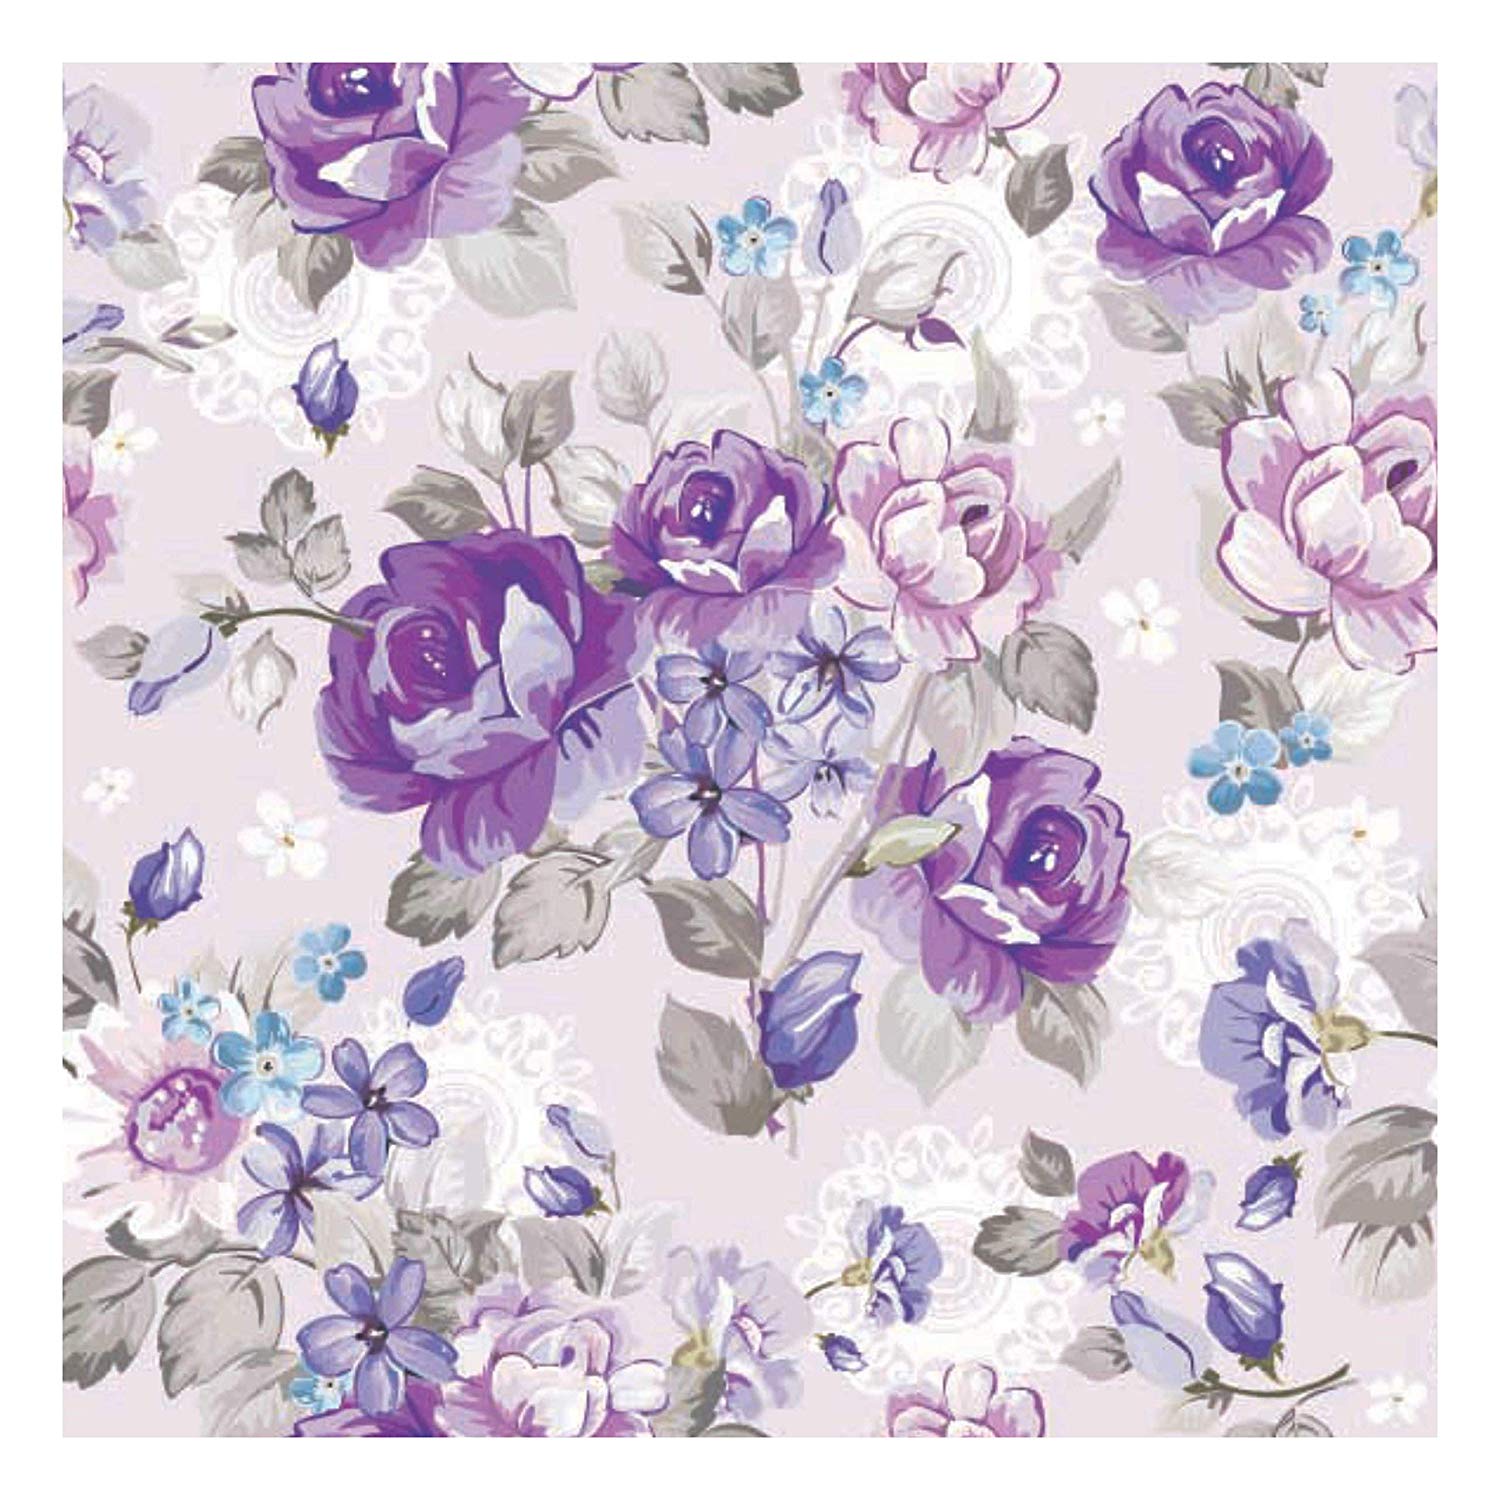 Violet Floral Wallpapers - Top Free Violet Floral Backgrounds - WallpaperAccess